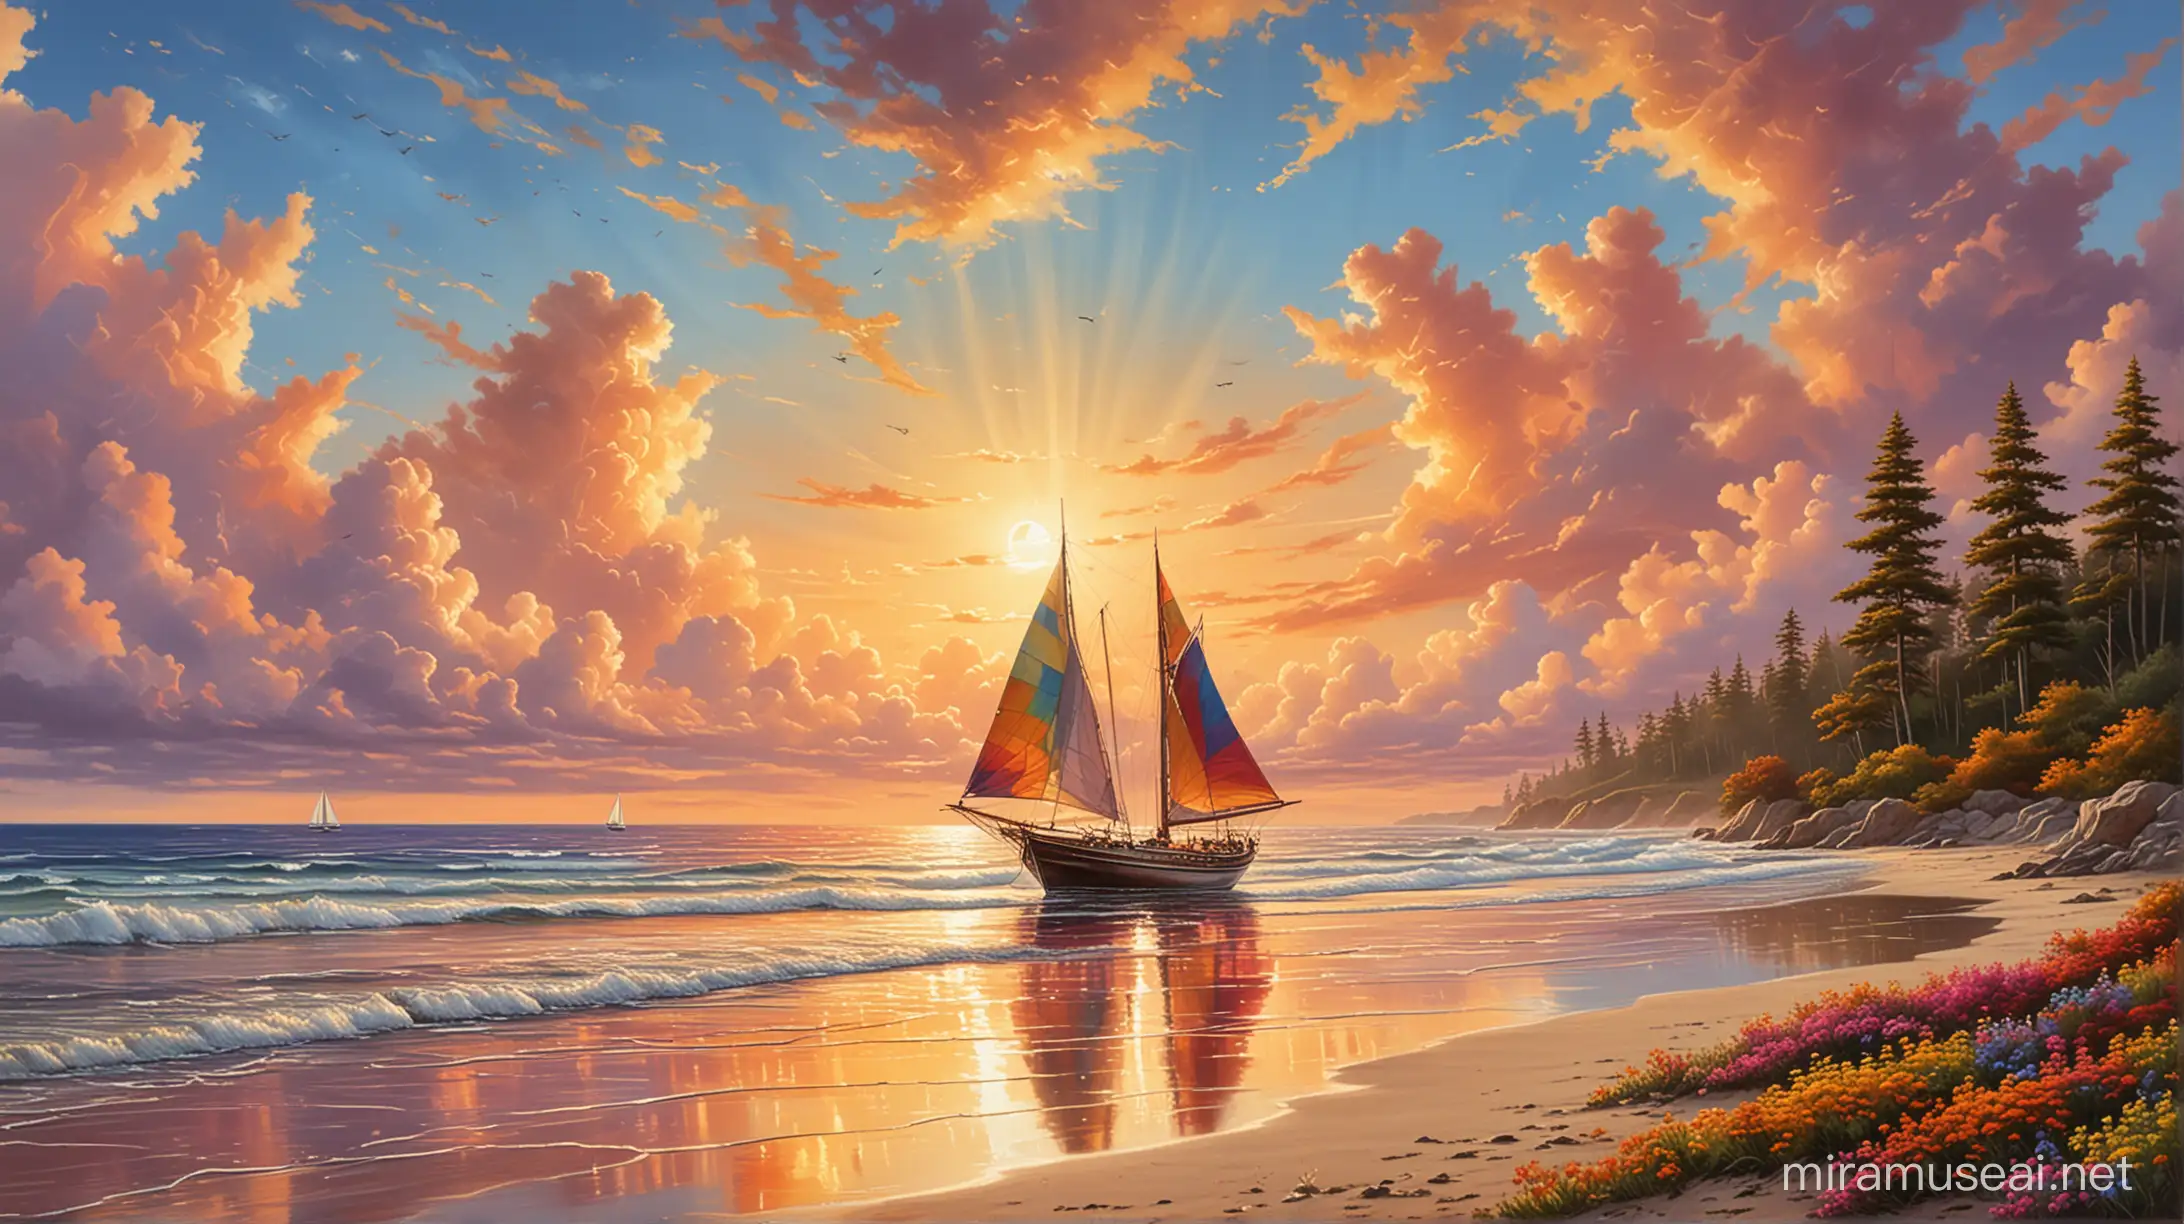 Vibrant Sunset Sailboat Scene with Colorful Sky and Ocean Reflections